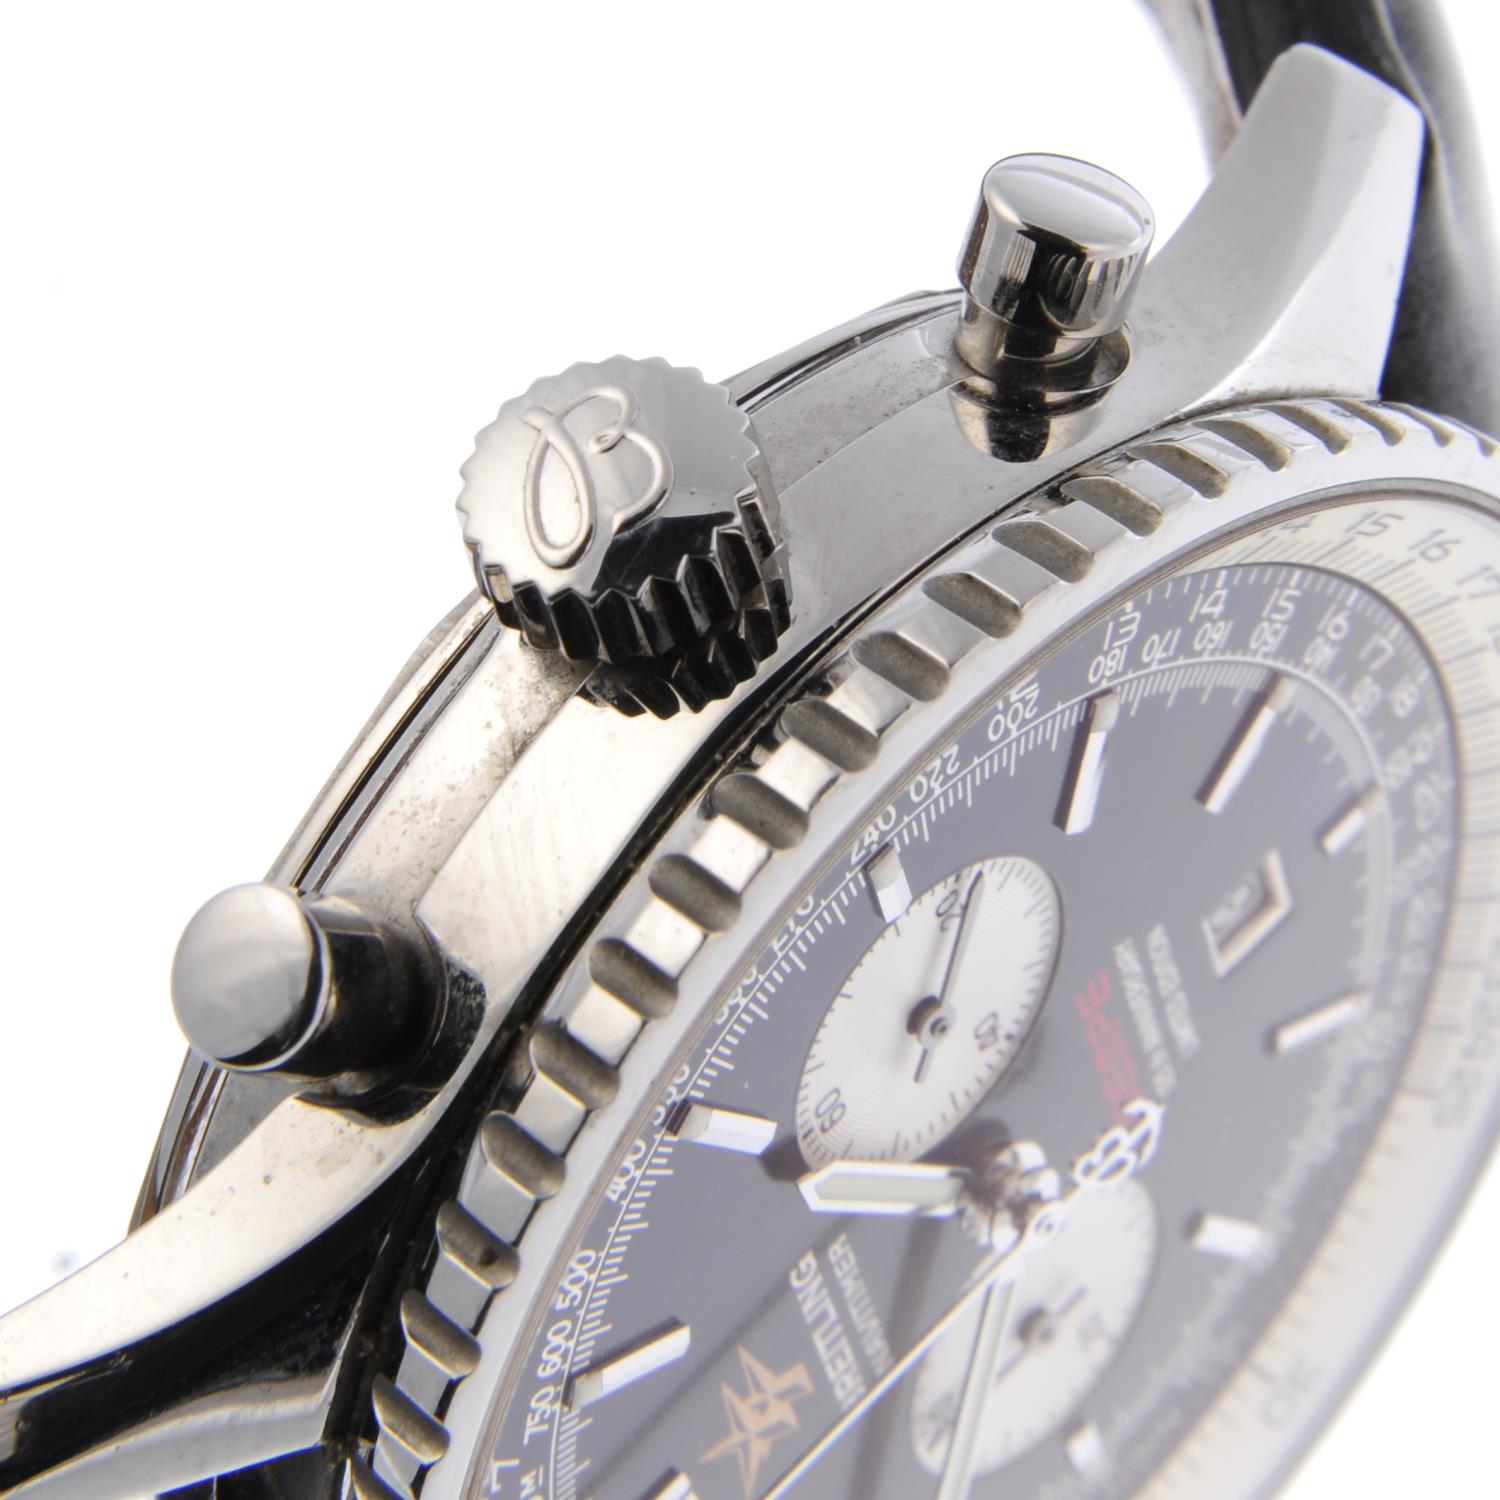 BREITLING - a limited edition gentleman's Navitimer 'Wempe 125th Anniversary' chronograph wrist - Image 4 of 4